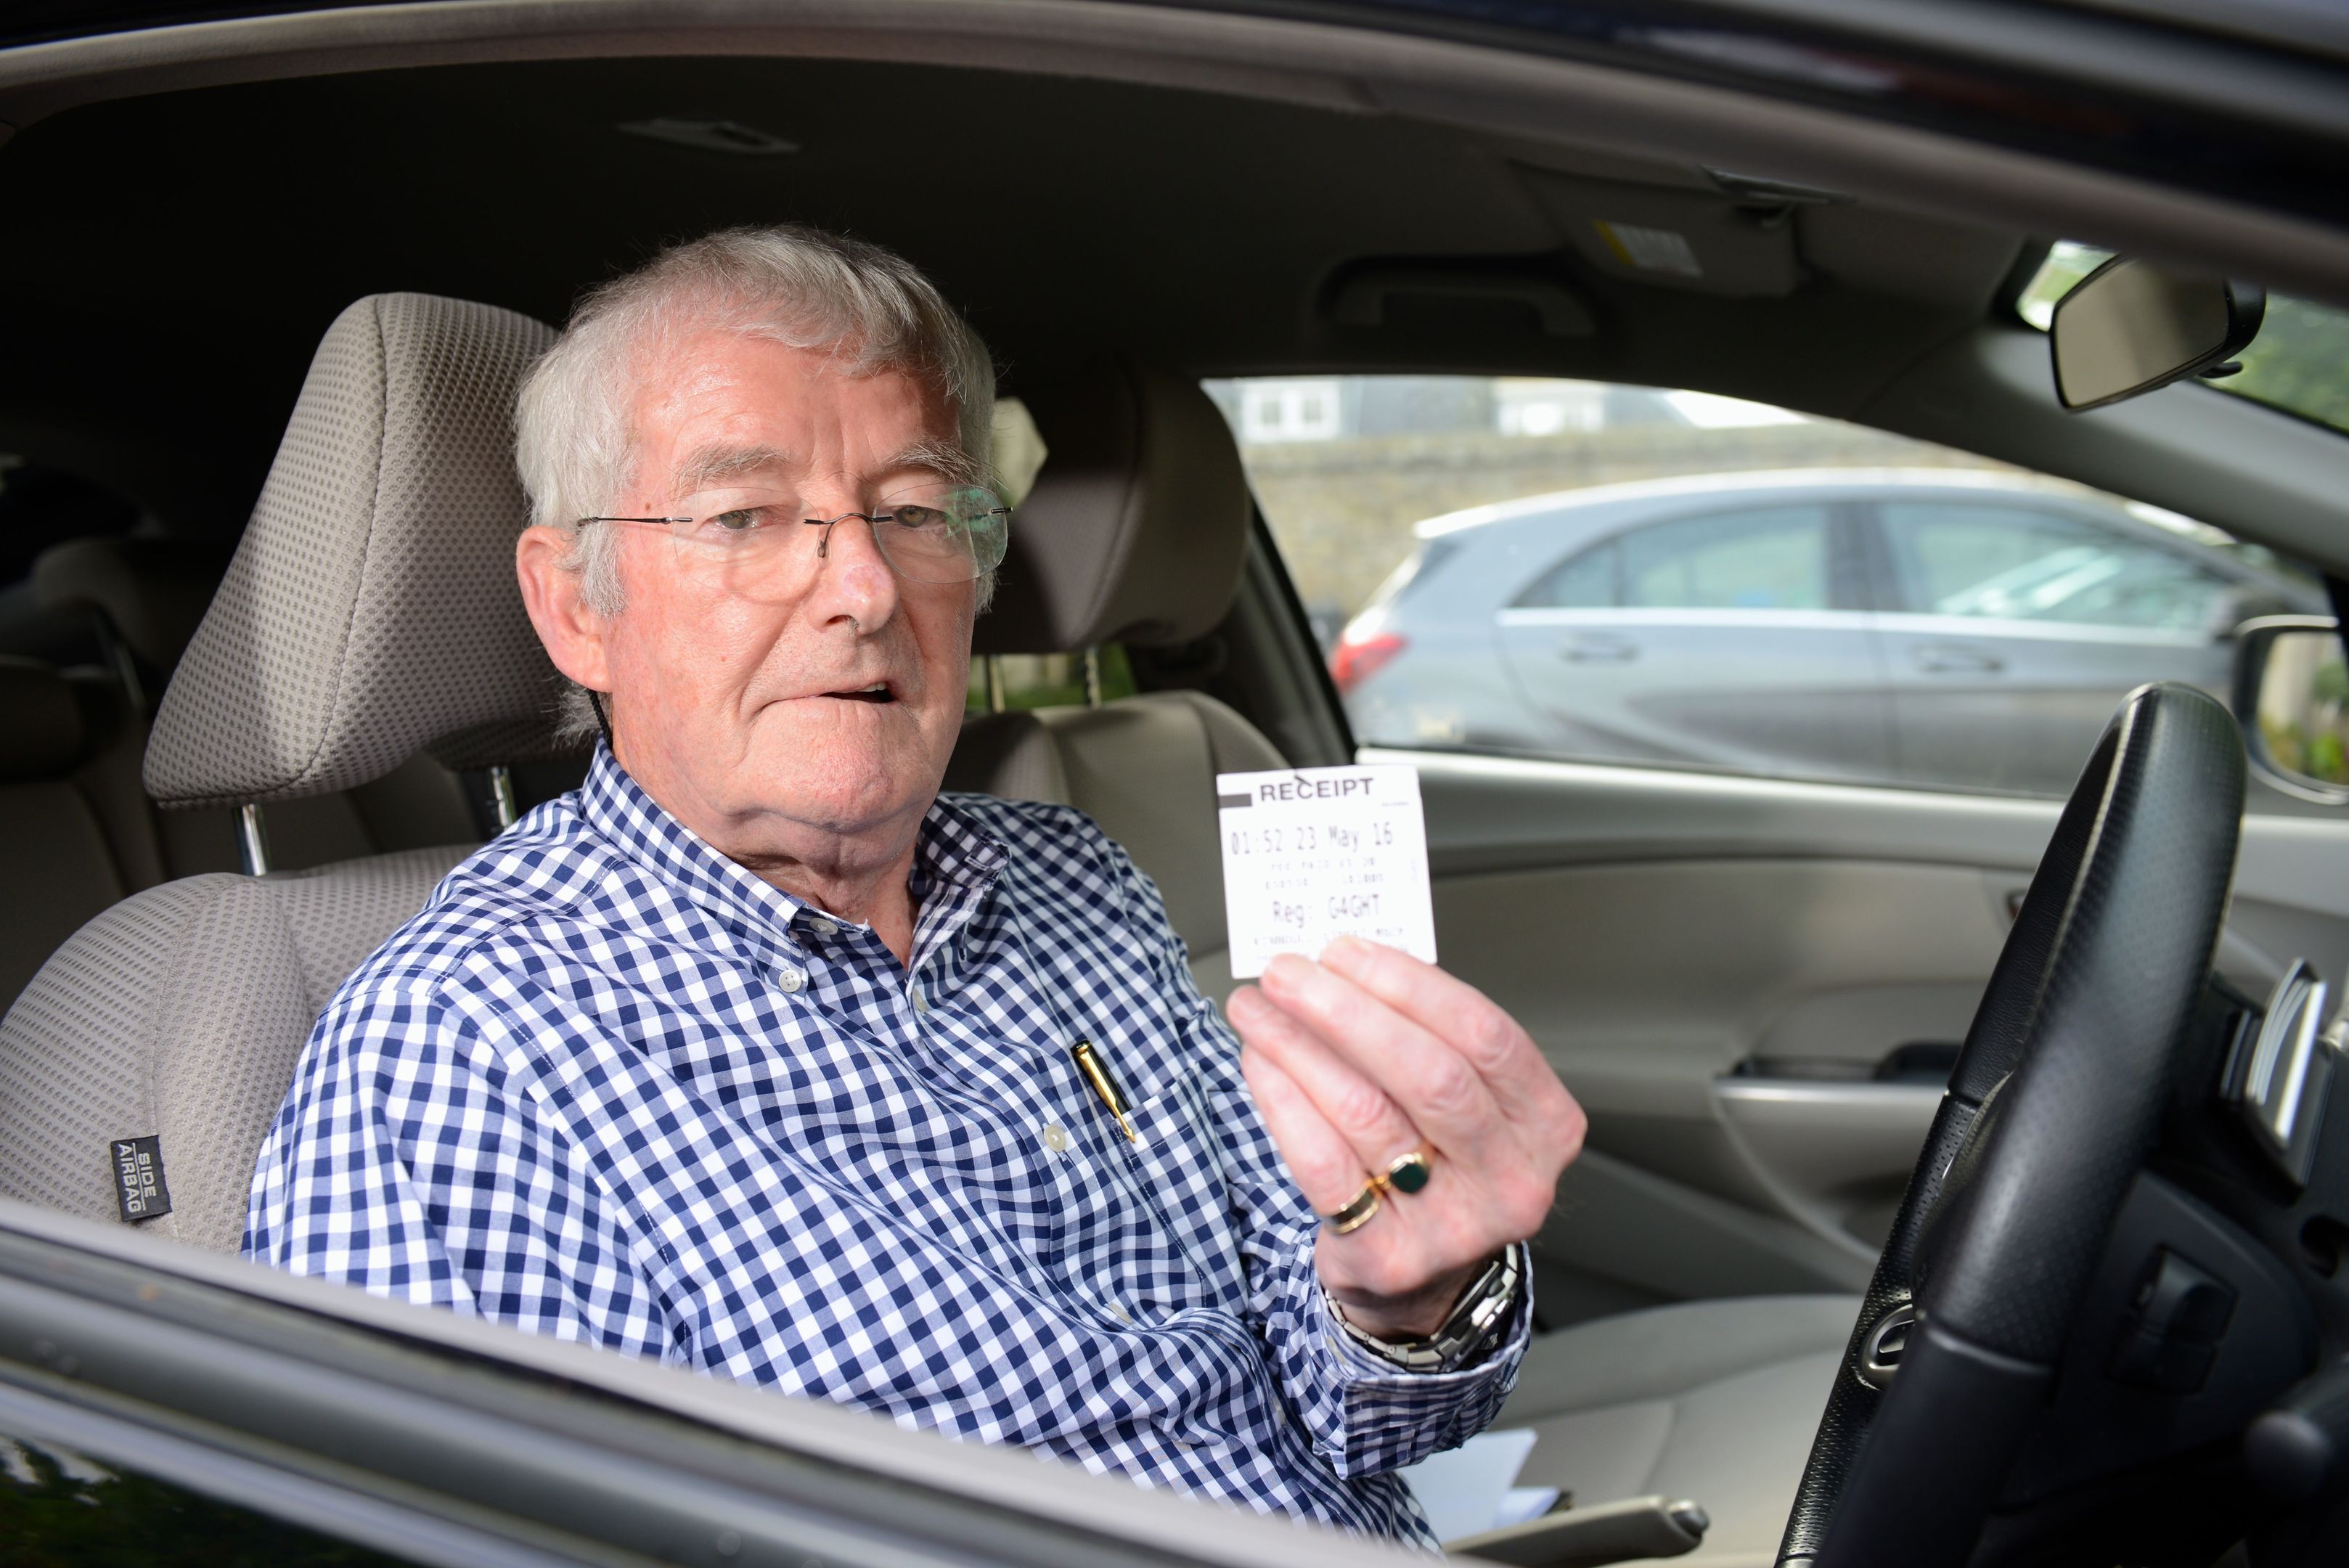 George with the controversial ticket